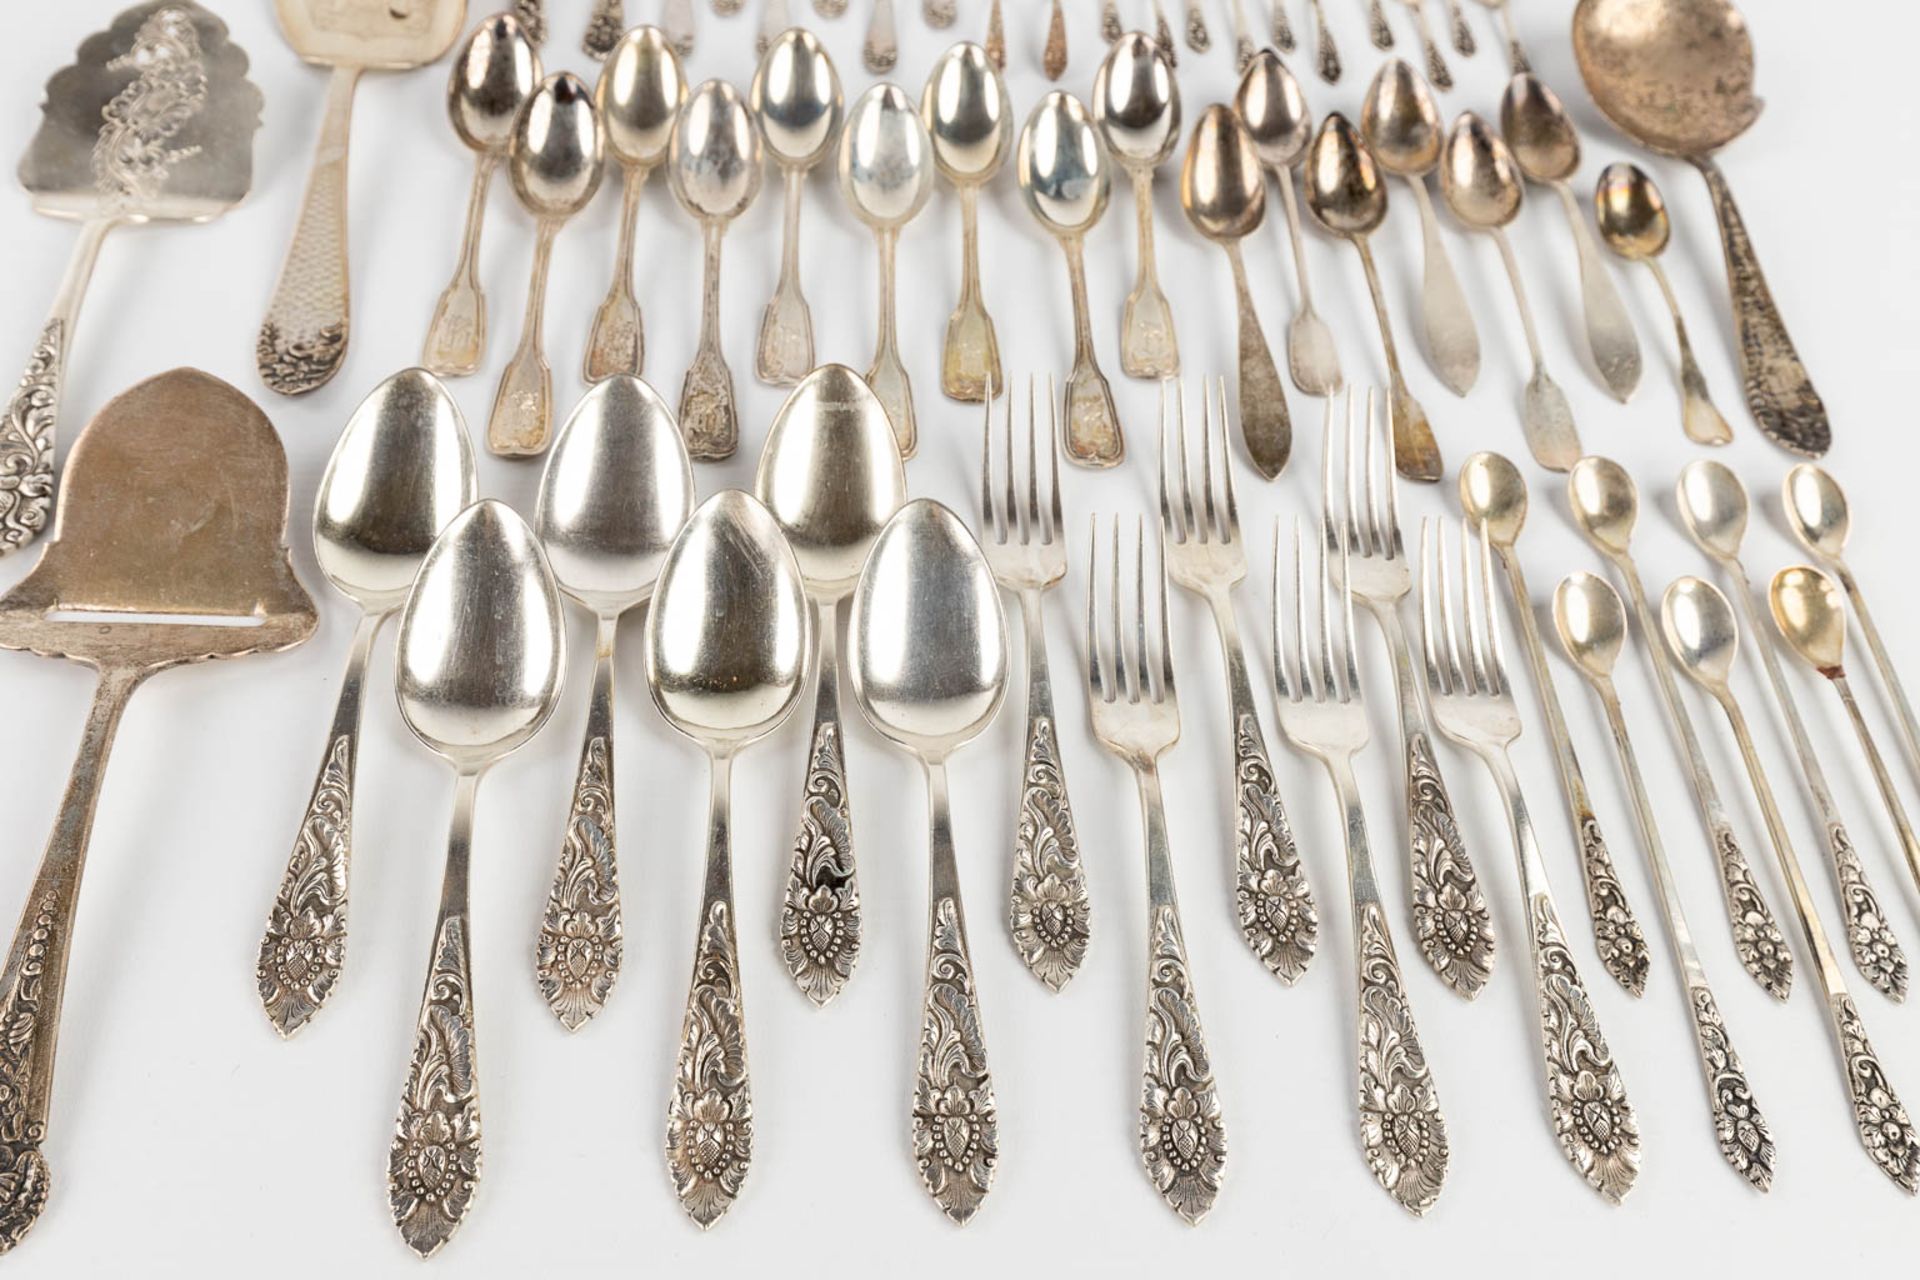 61 pieces of silver cutlery and accessories. (L:29 cm) - Image 5 of 22